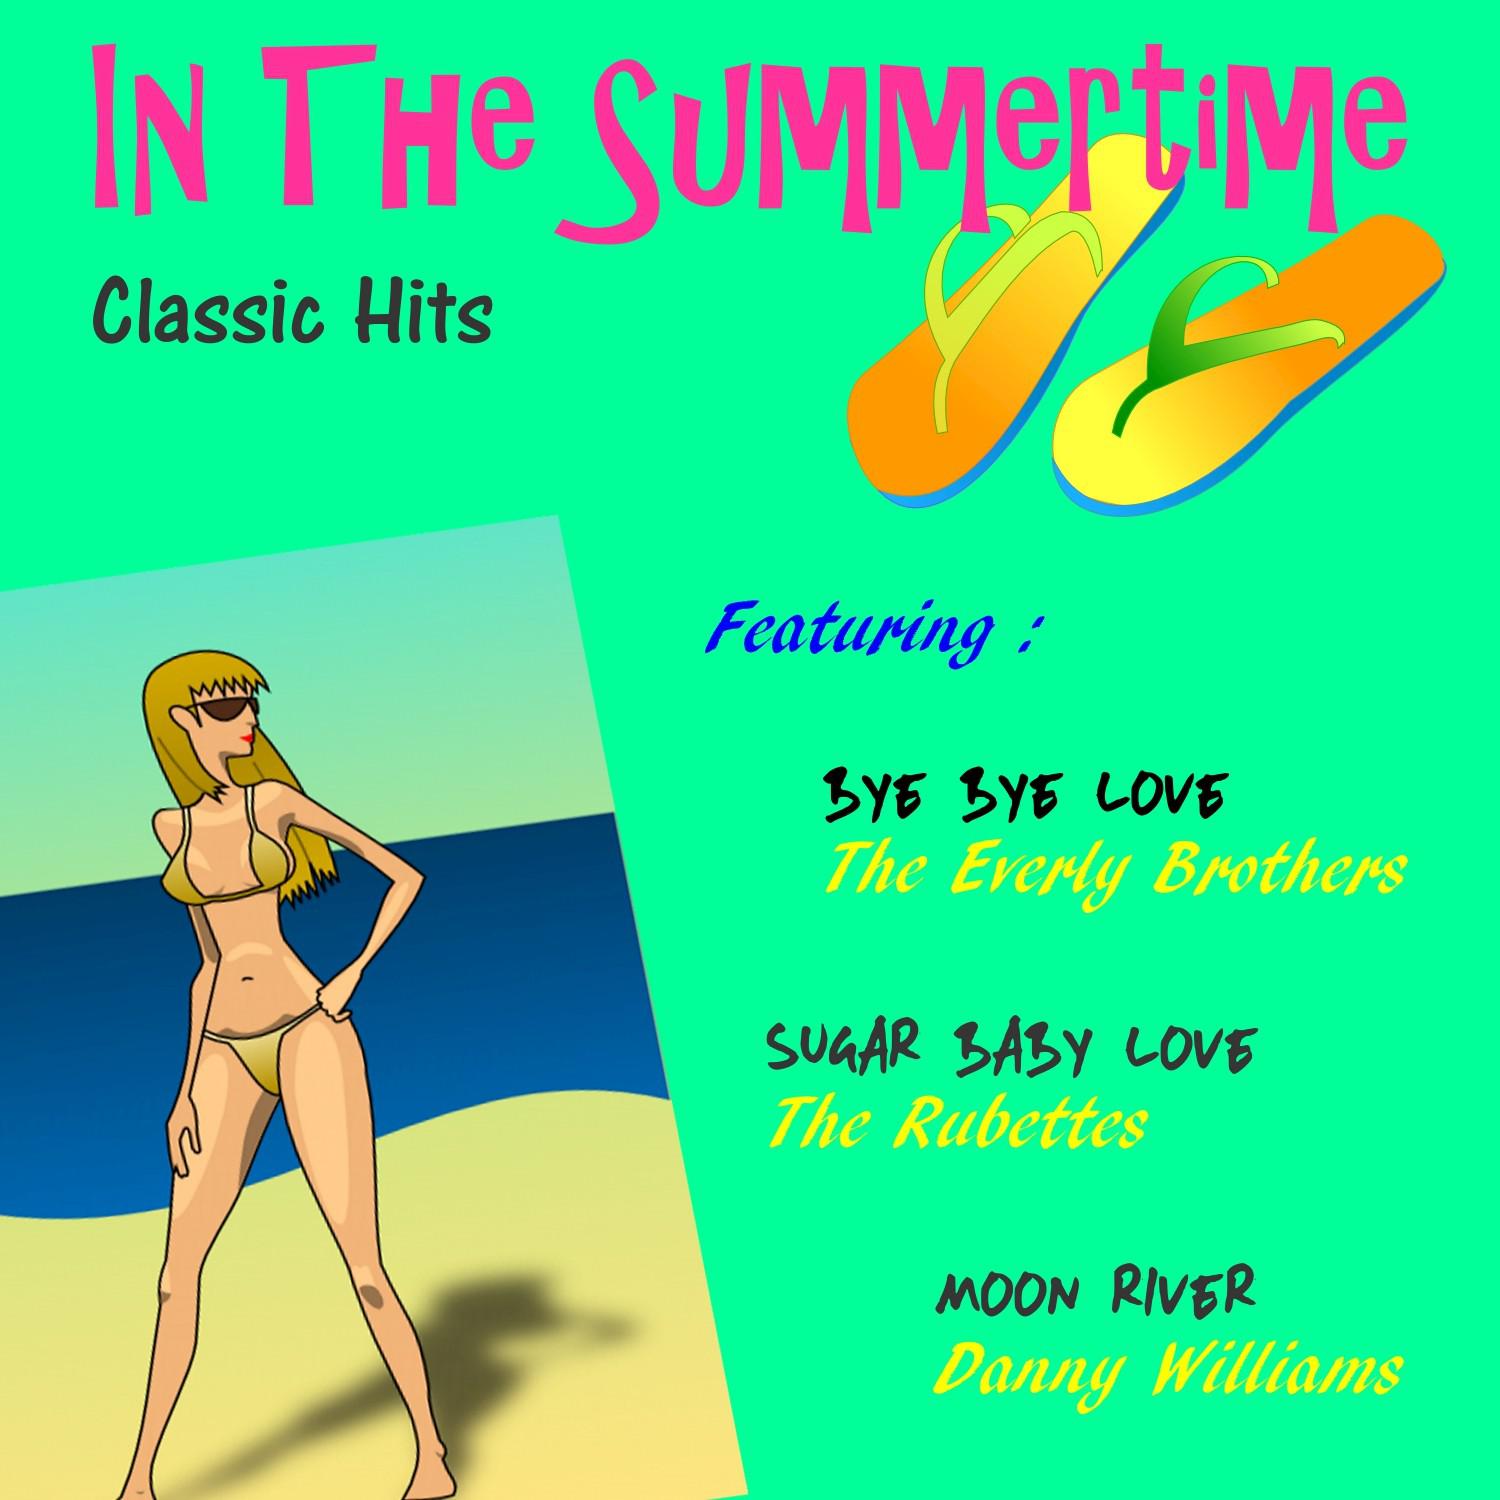 In the Summertime - Classic Hits